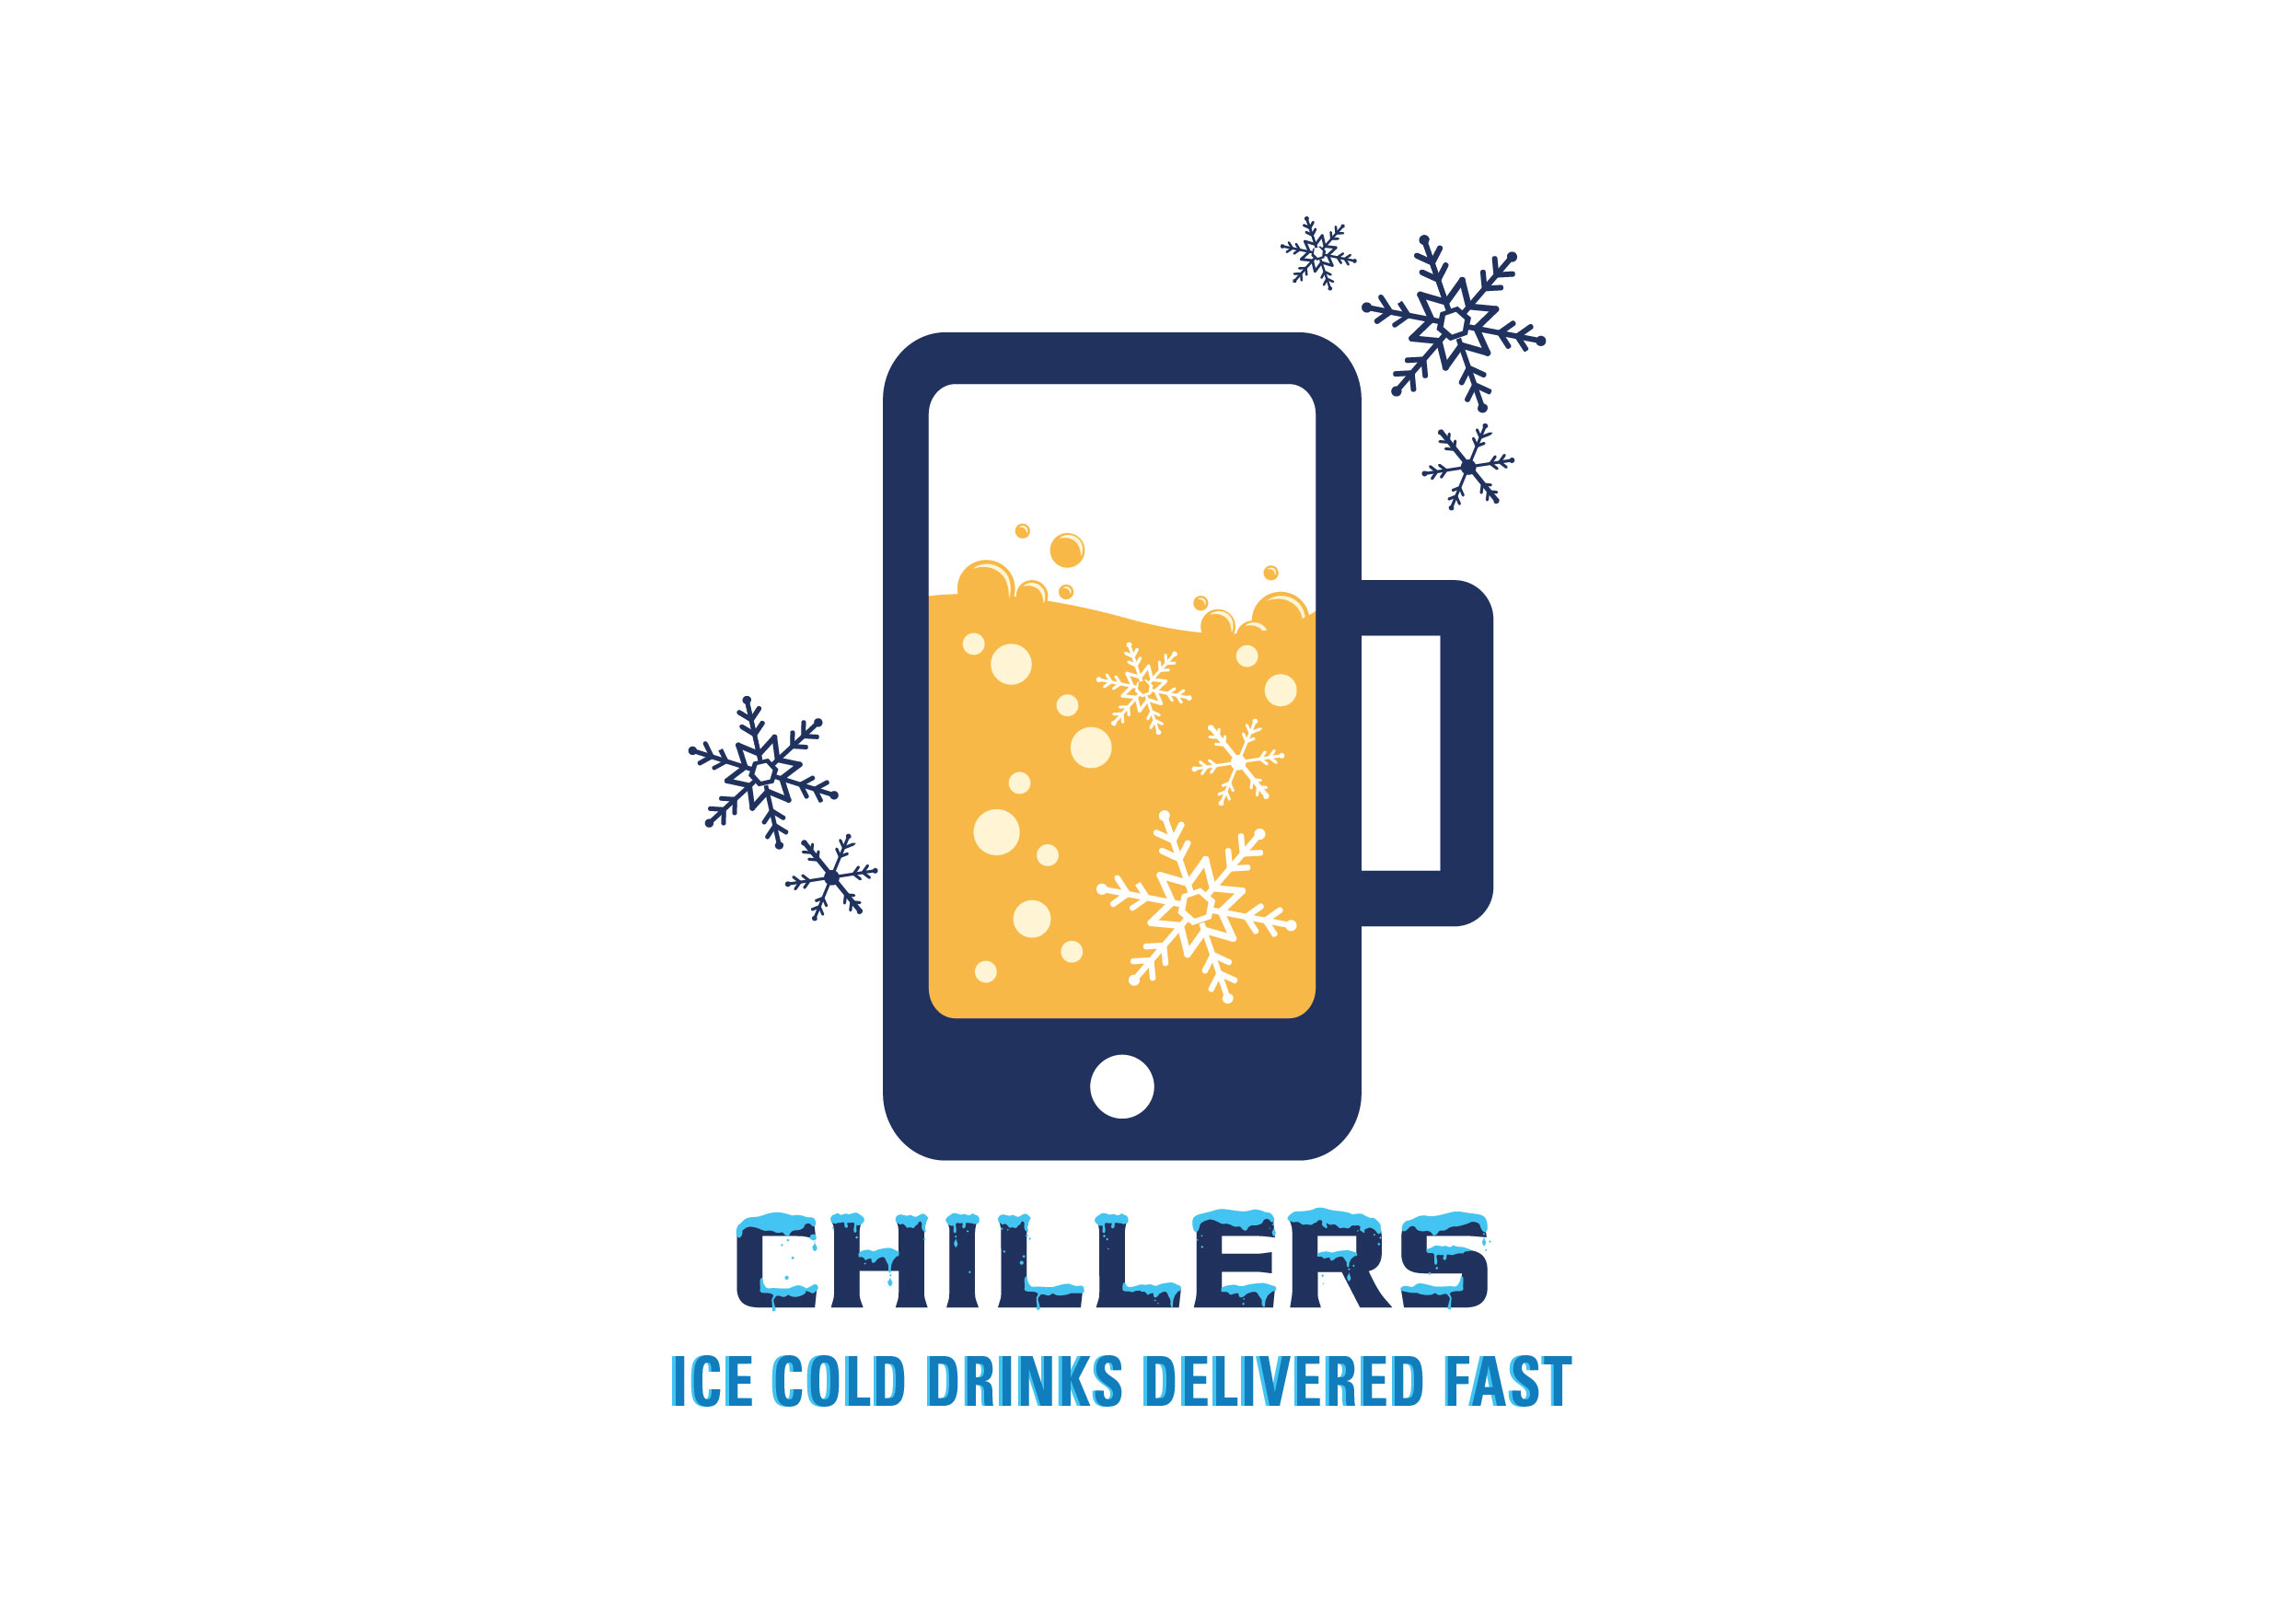 Chillers.com.hk: your easiest way to fast alcohol delivery